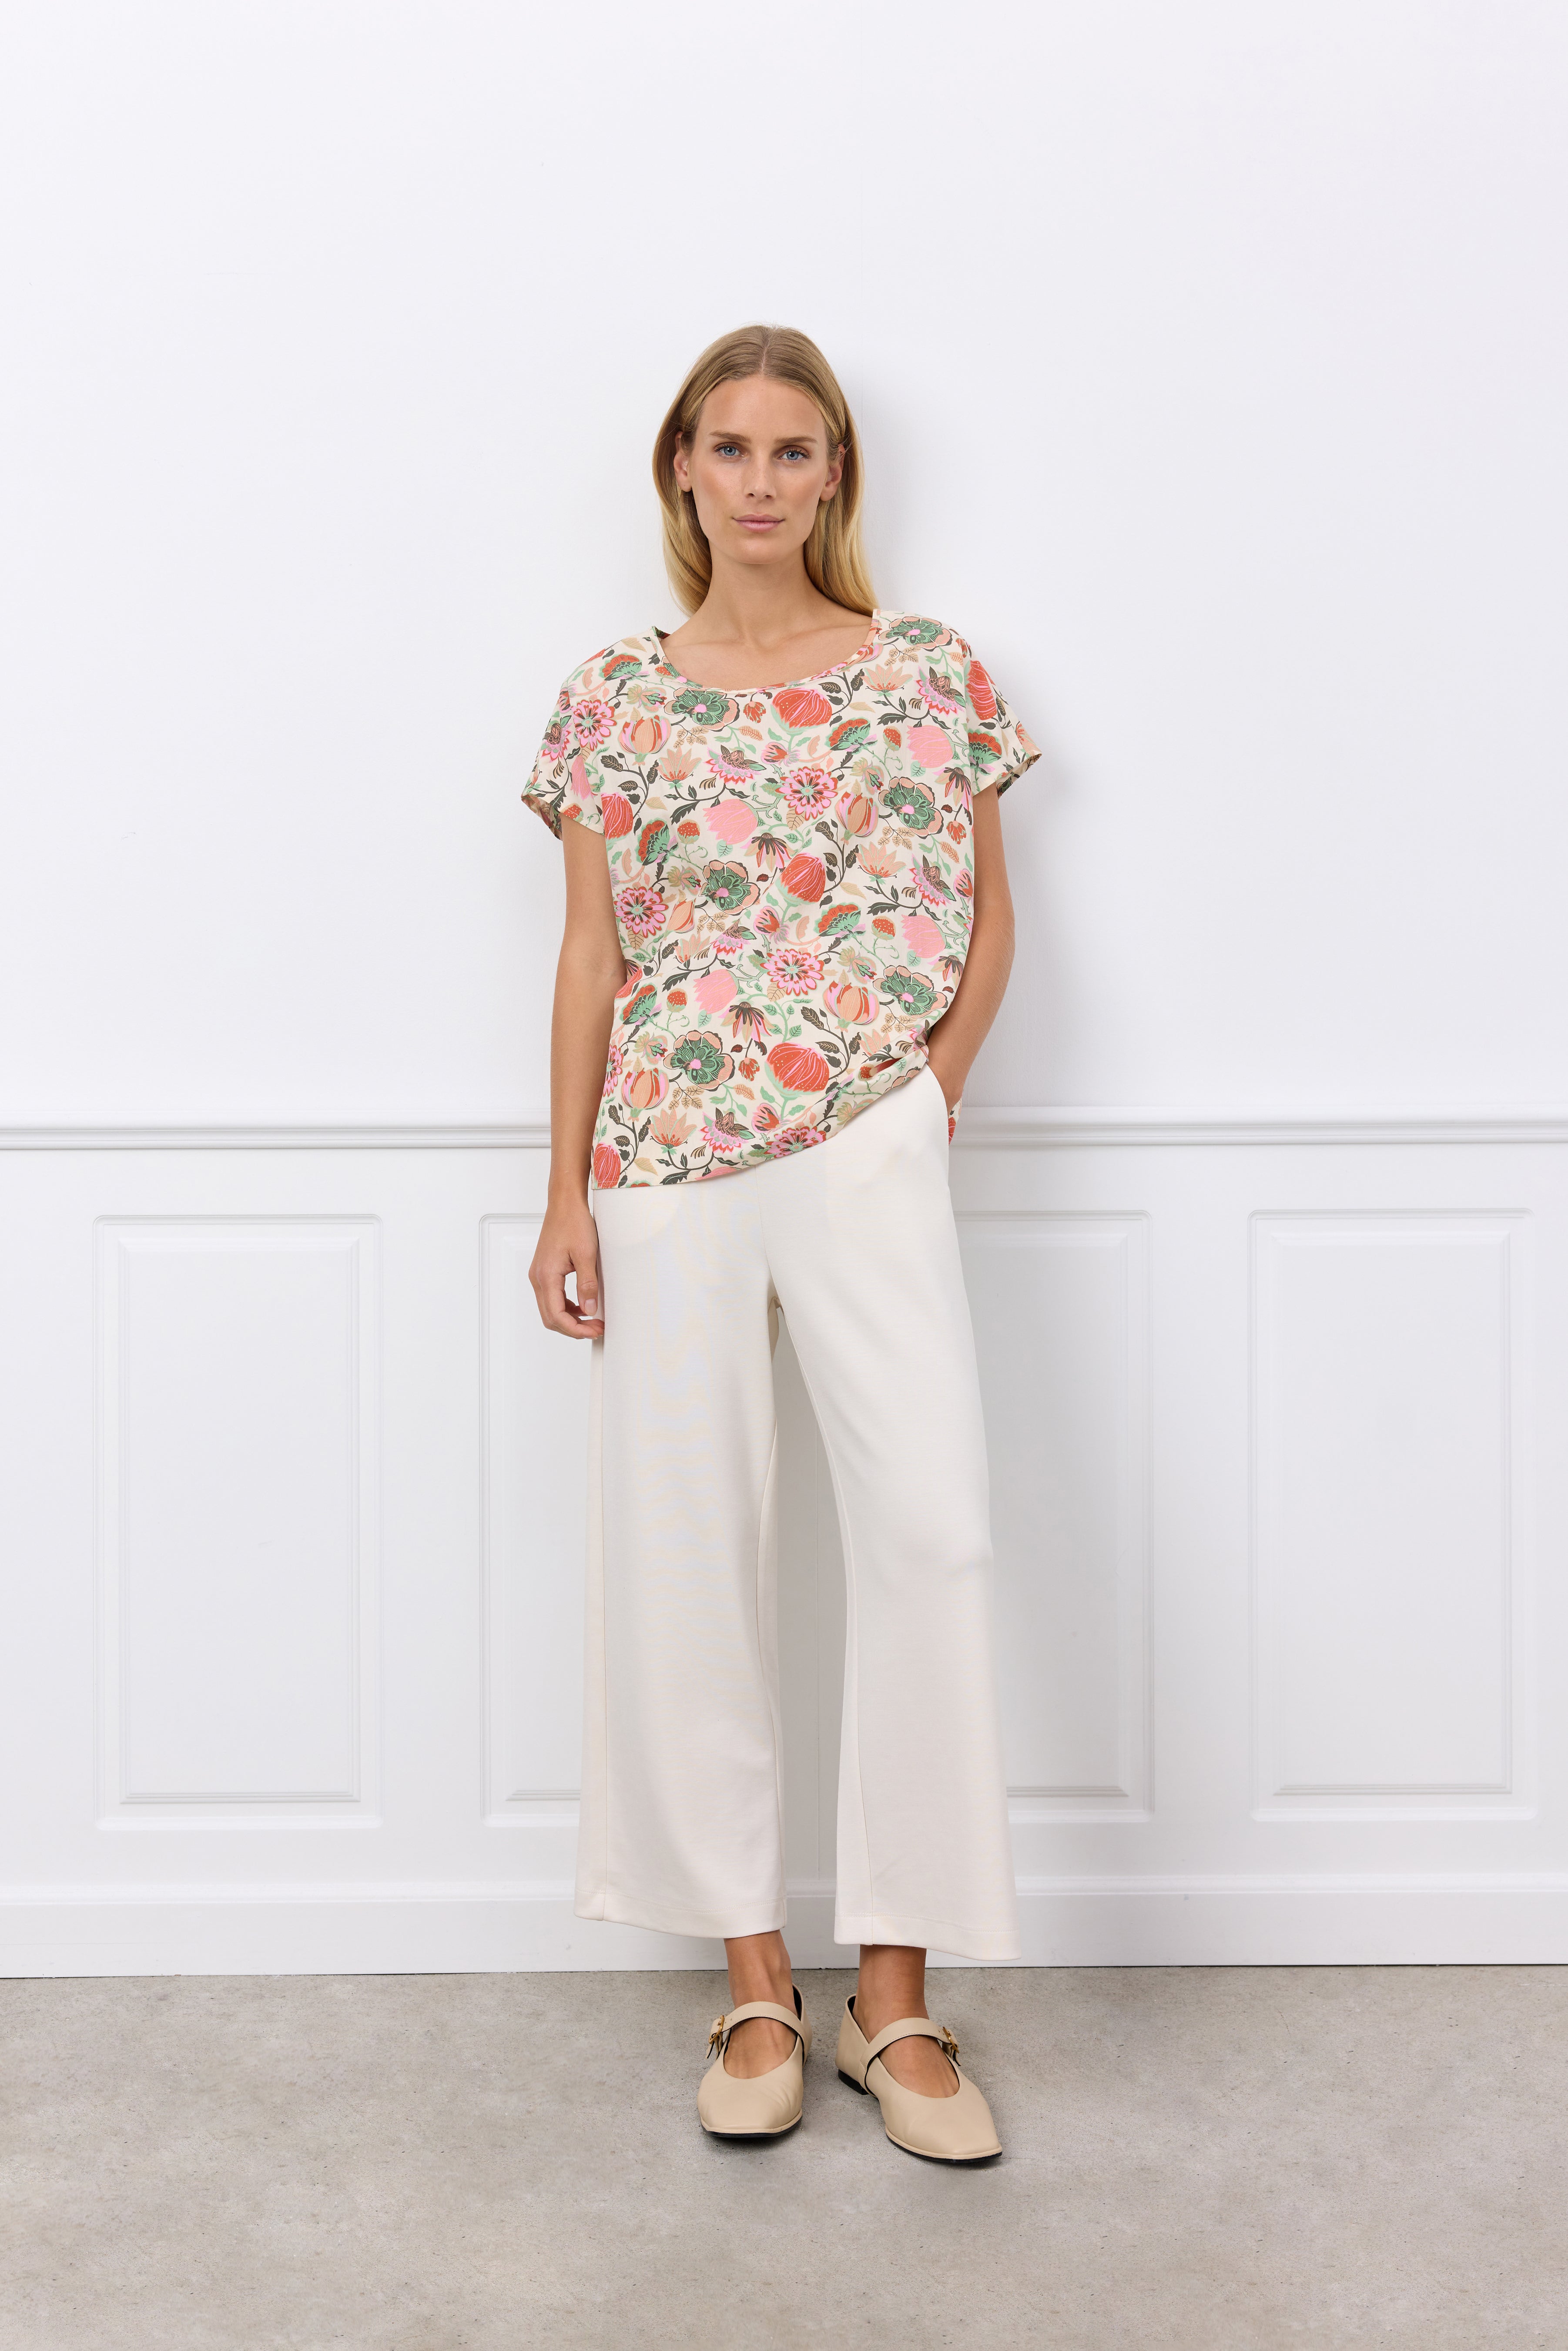 Soya Concept (40579) Women's Short Sleeve Graphic Floral Blouse in a Peach Floral Print With PInk & Green Hues over a Cream Background 